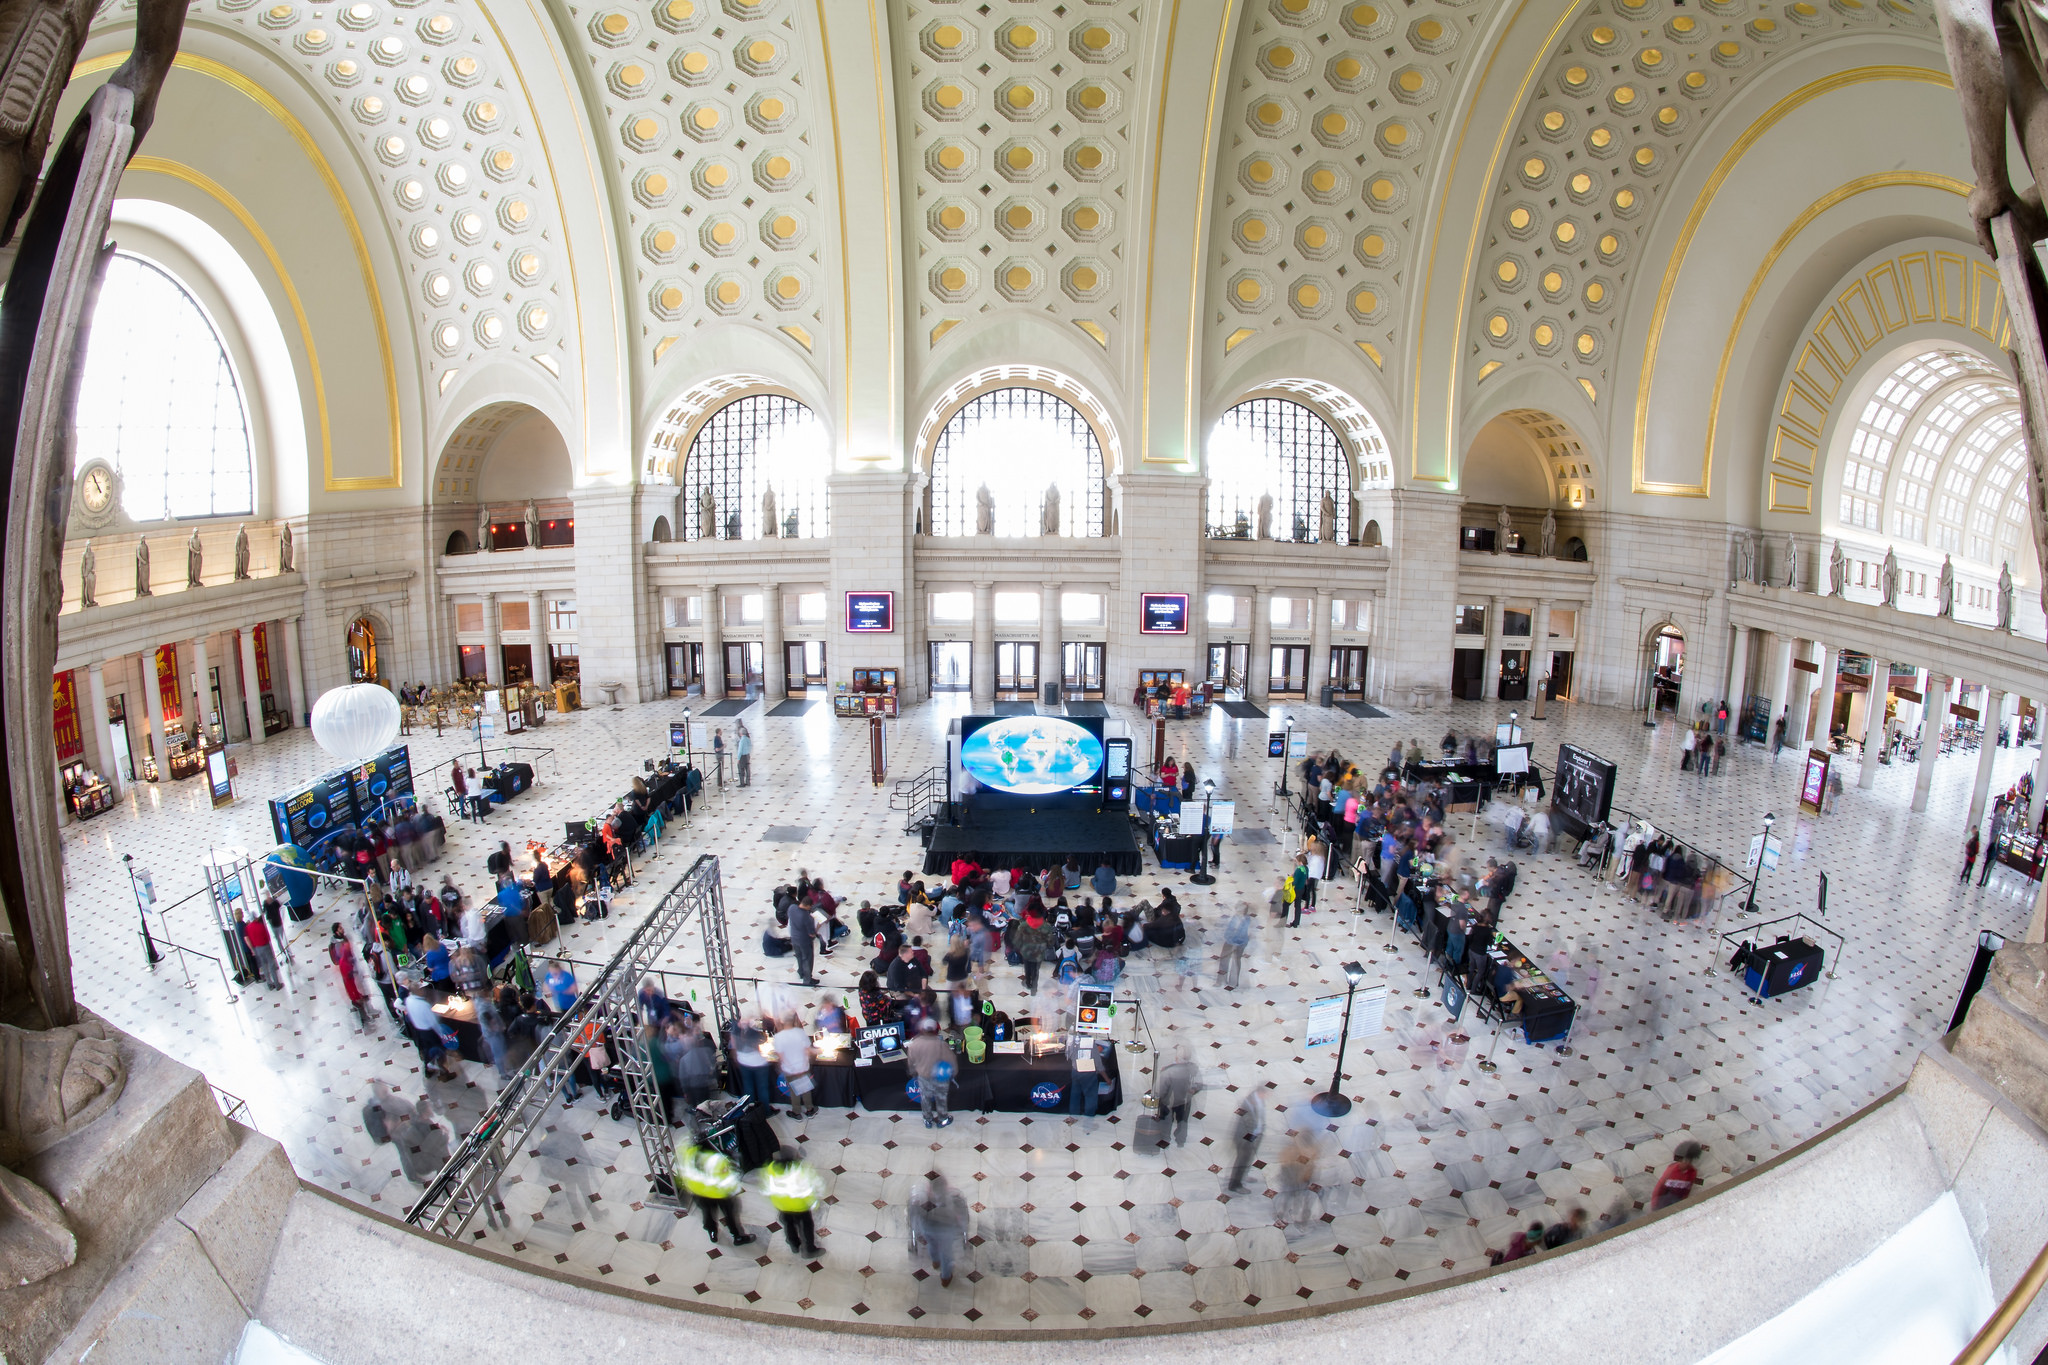 A view of the exhibits at the NASA Earth Day event on Thursday, April 19, 2018 at Union Station in Washington, D.C.